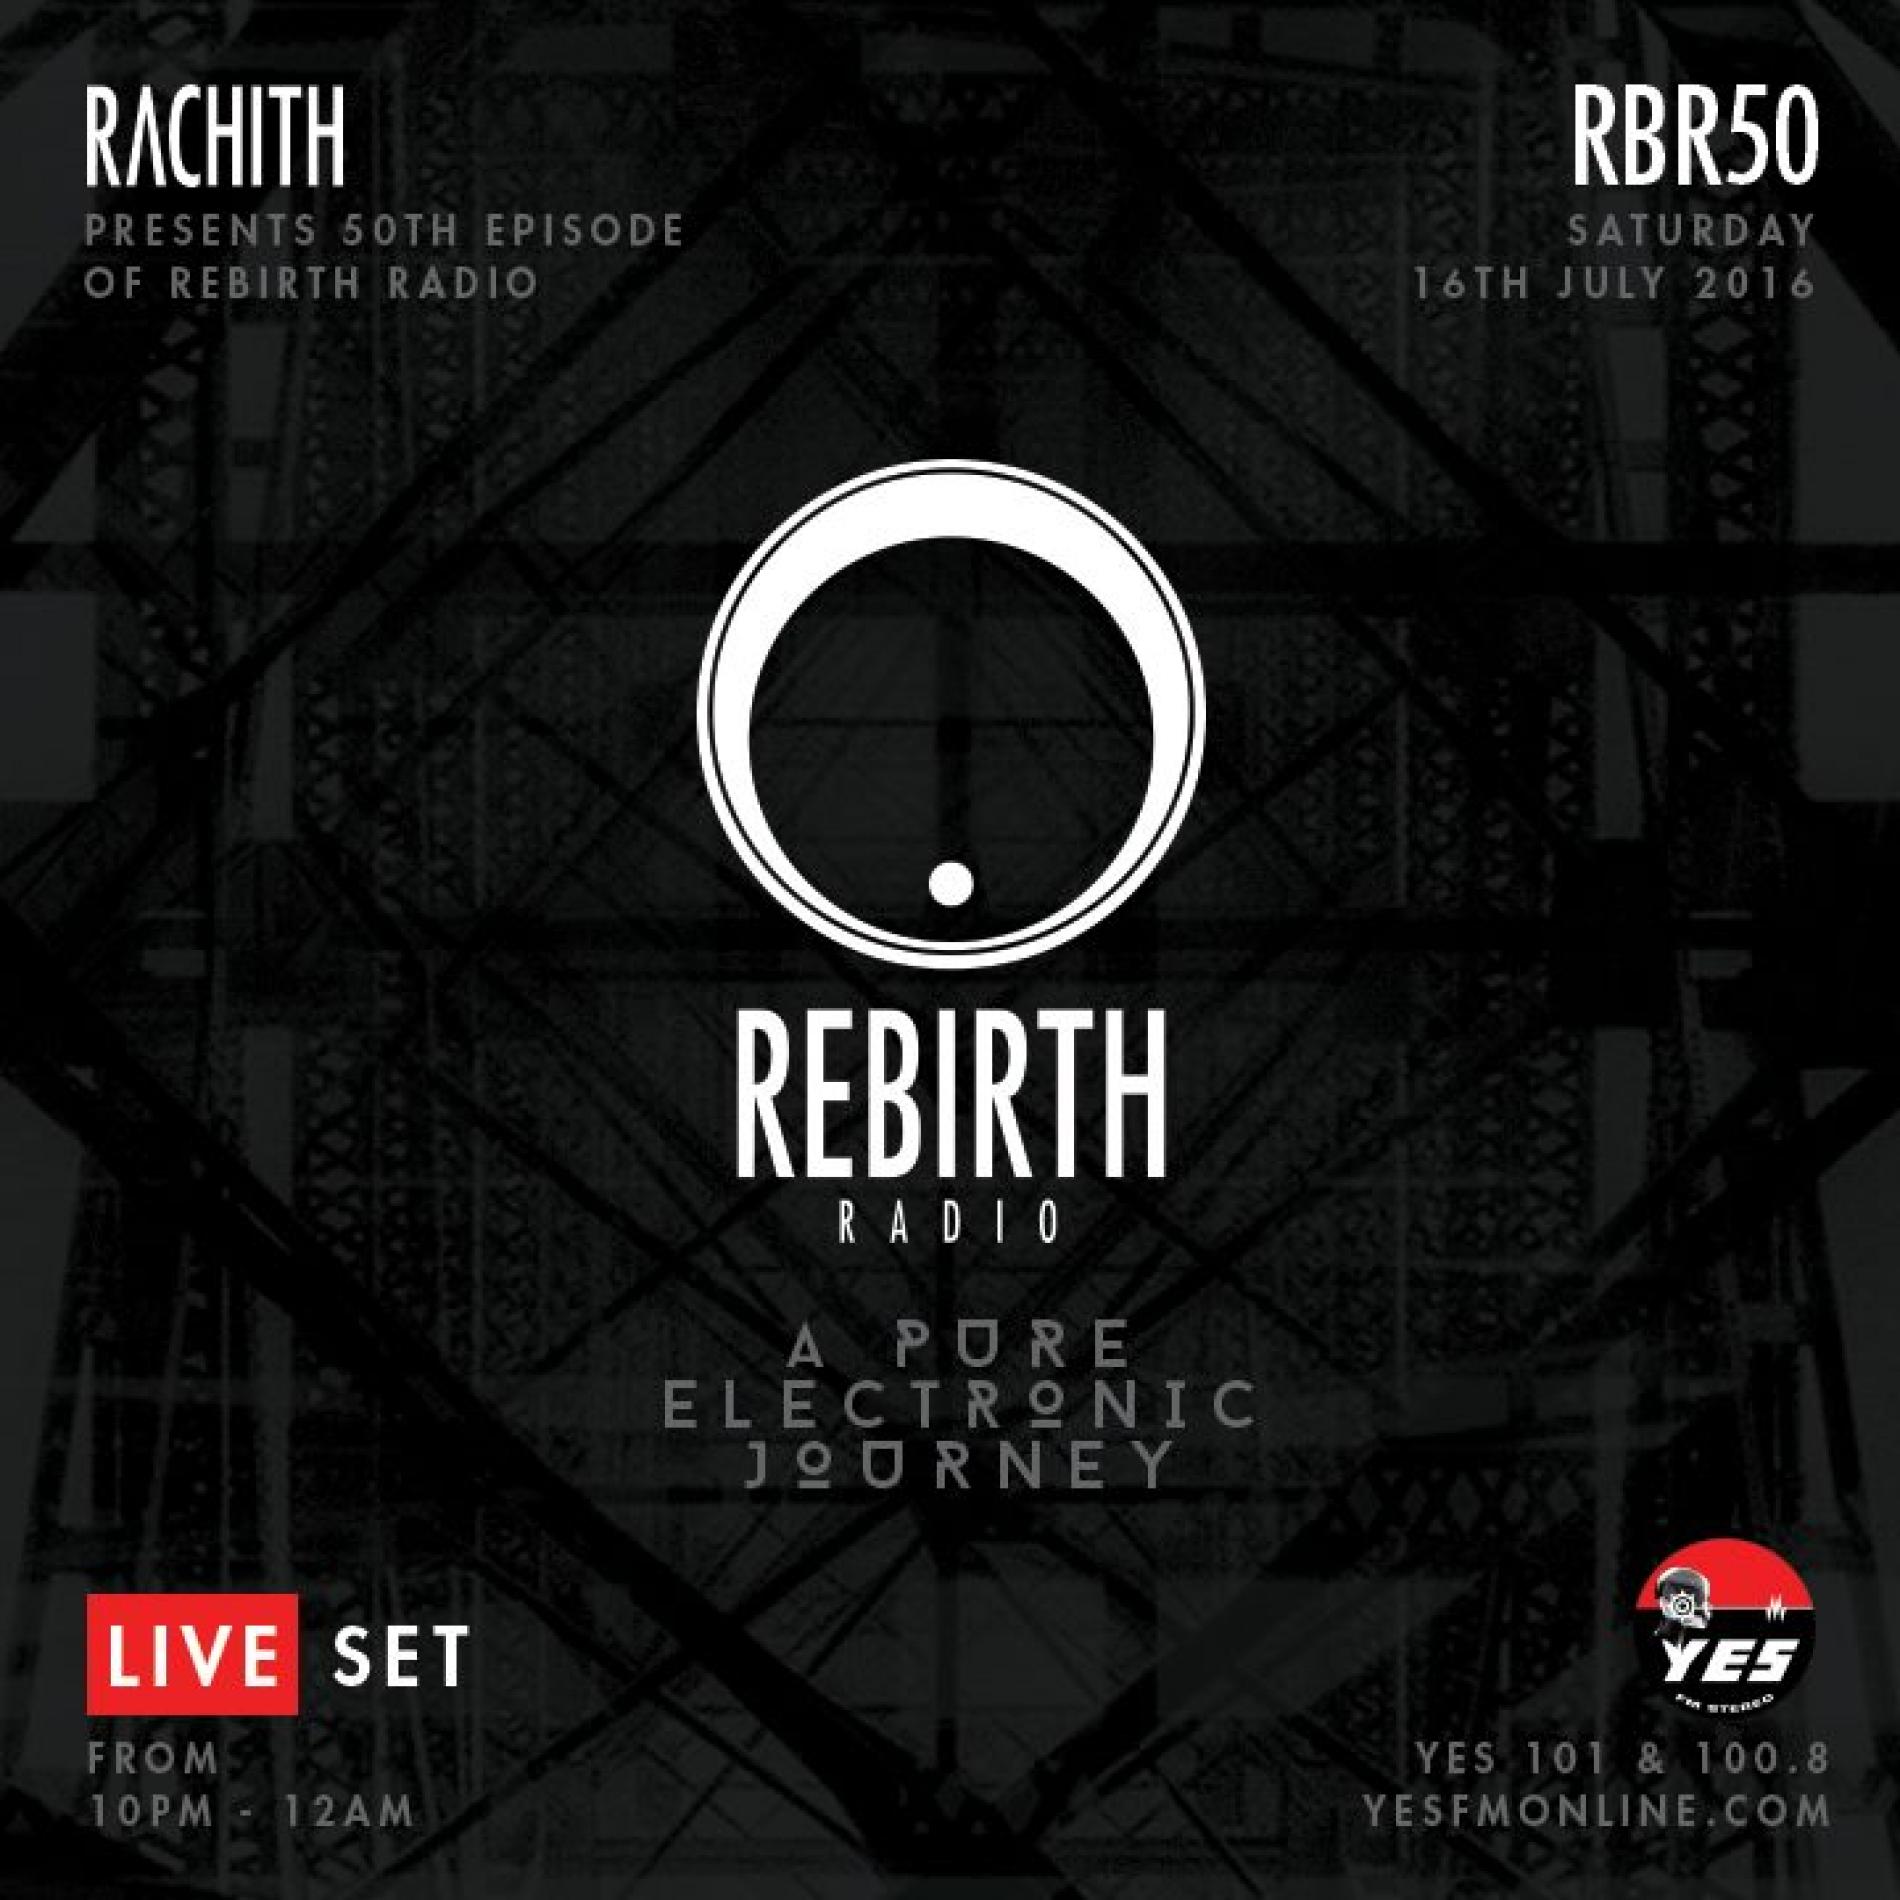 Rachith Presents RBR50 – Live From YES101